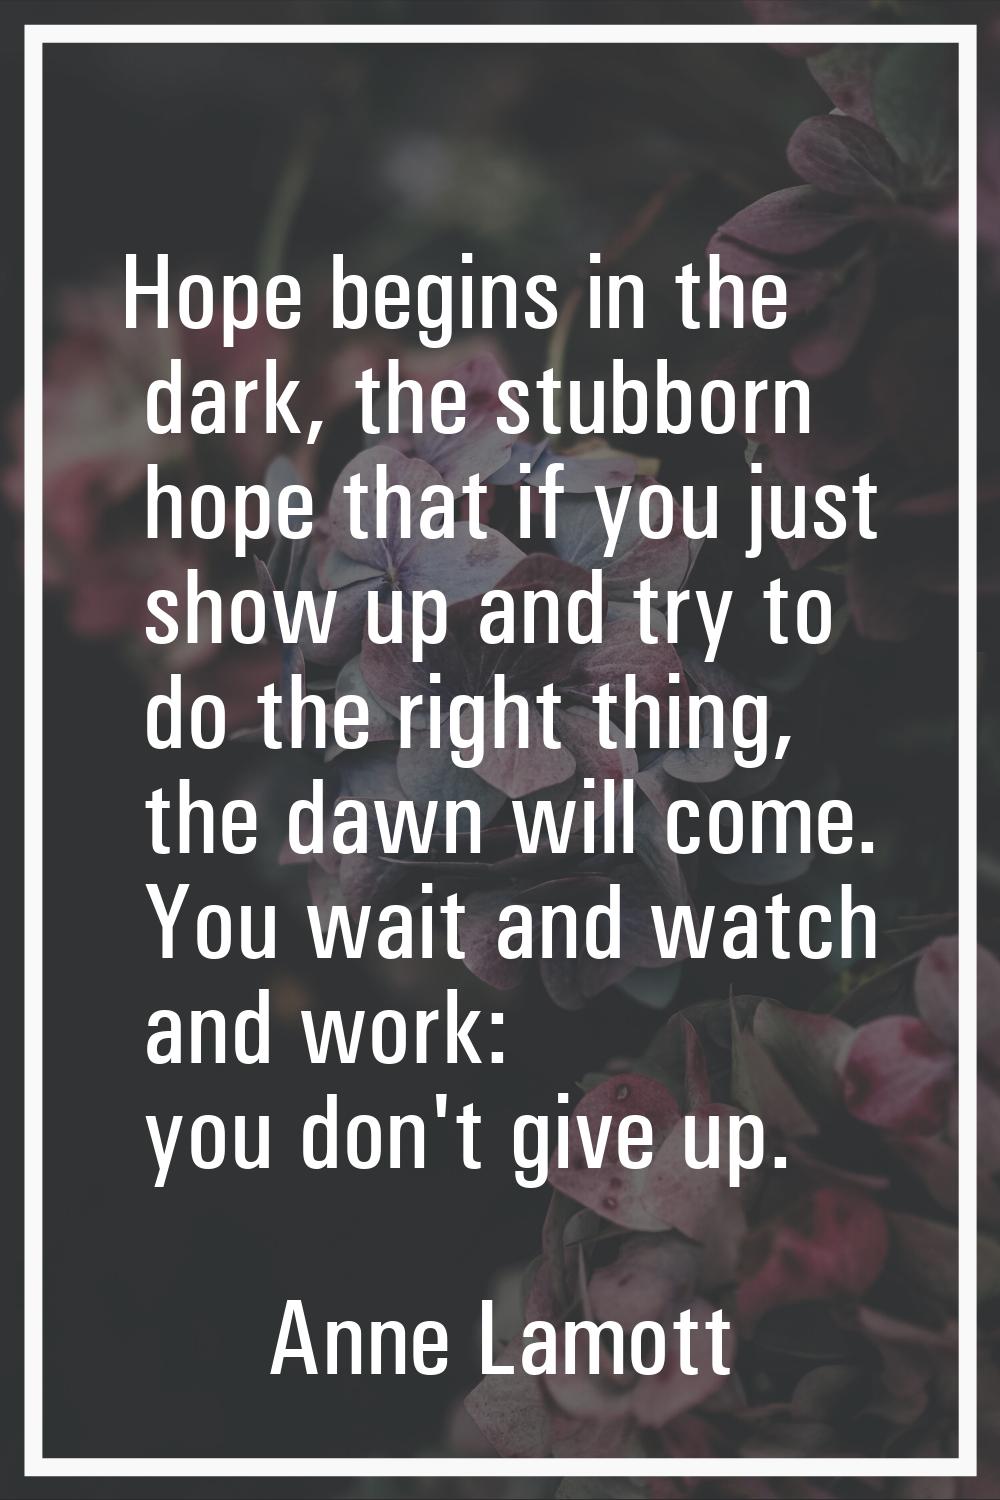 Hope begins in the dark, the stubborn hope that if you just show up and try to do the right thing, 